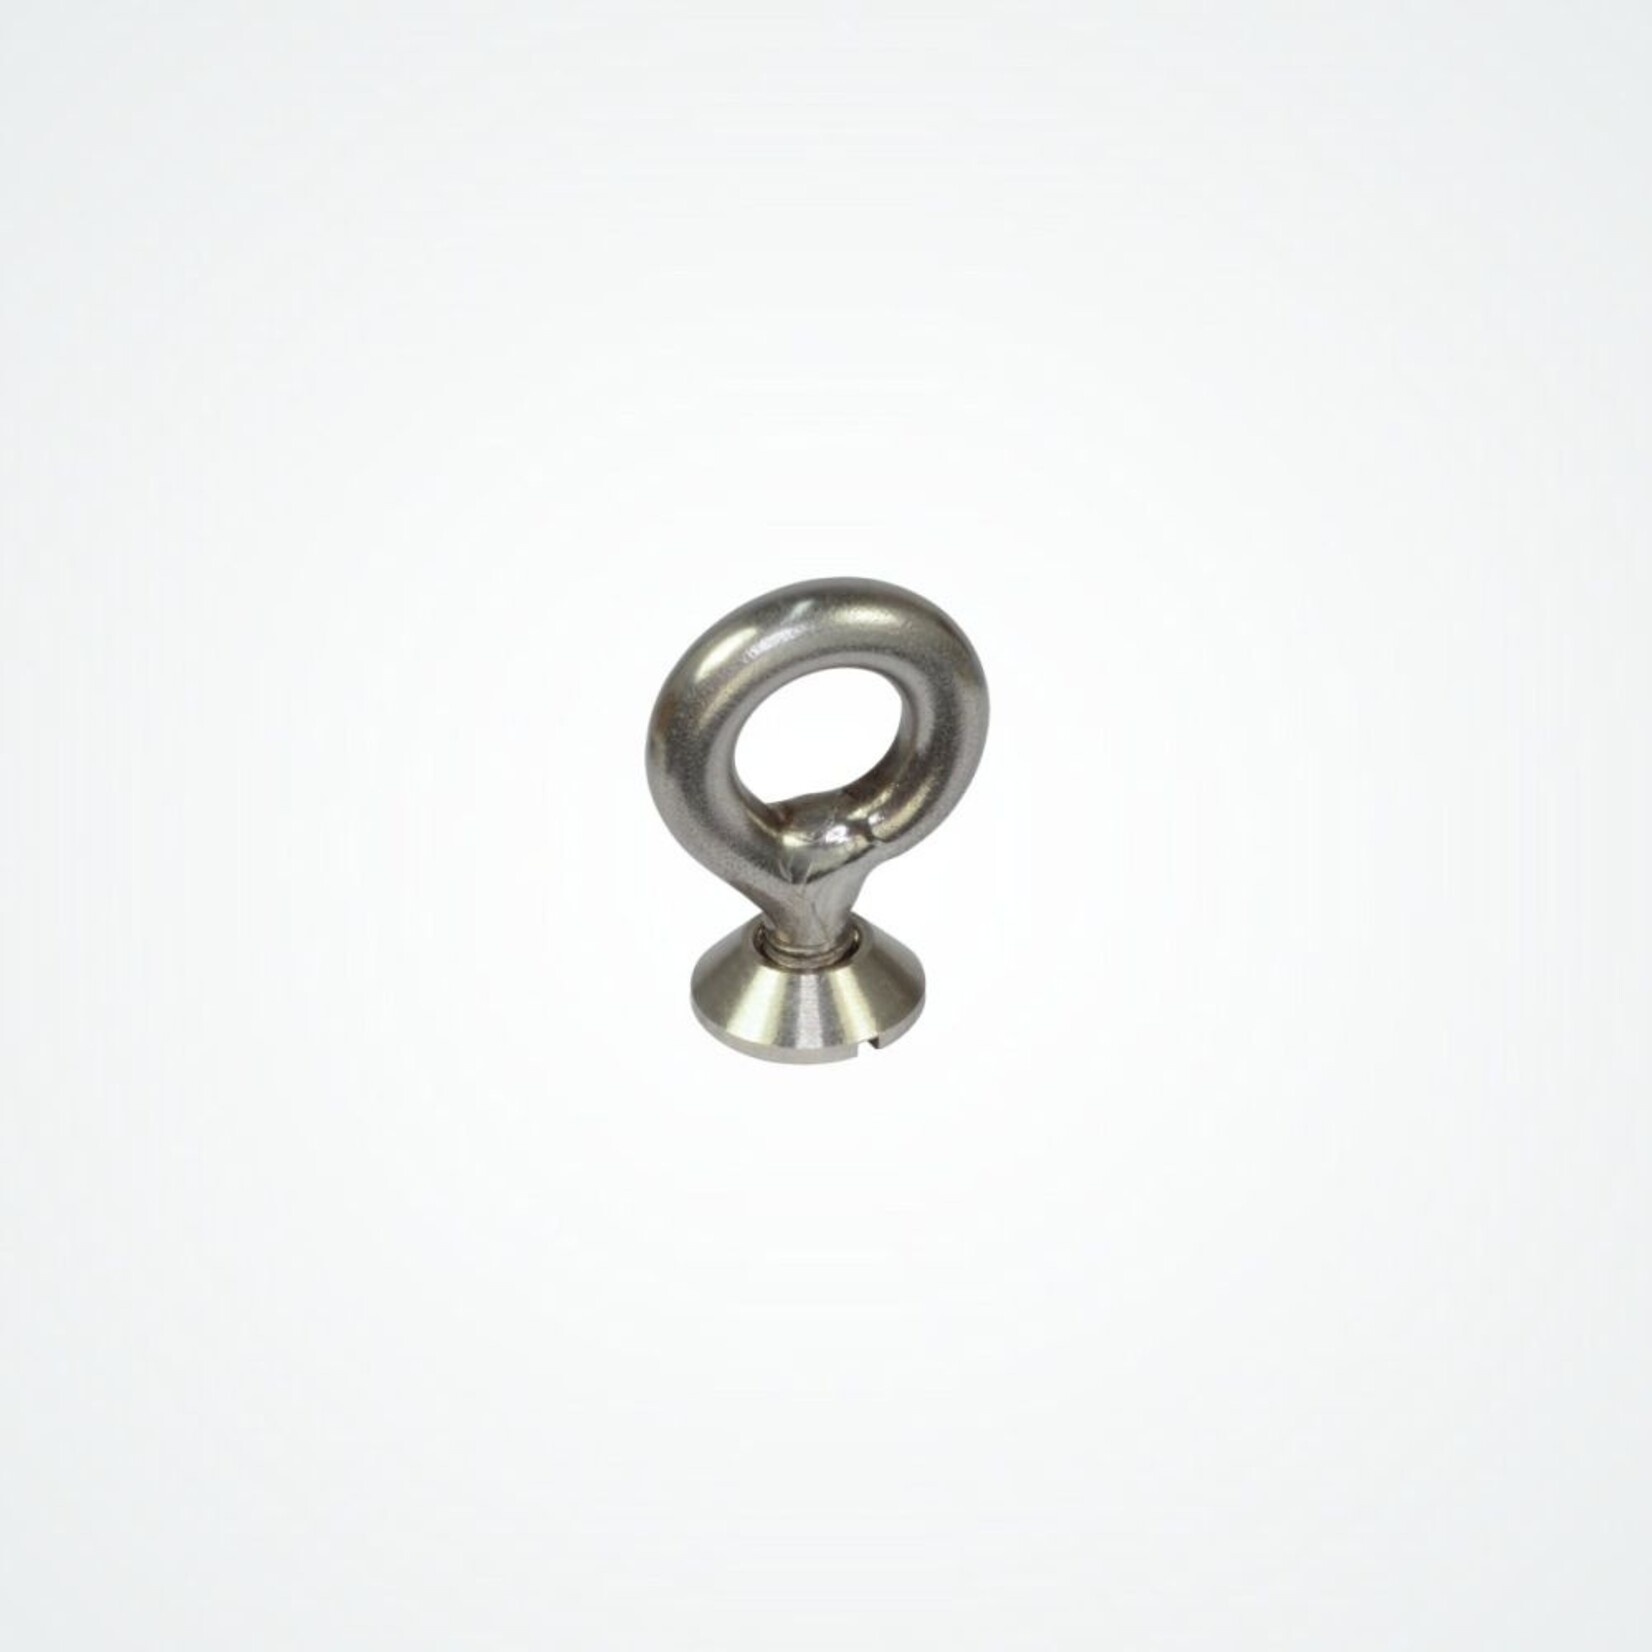 Clamcleat Rope Guide for CL230 & CL253 (Eyebolt + Nut + Washer)